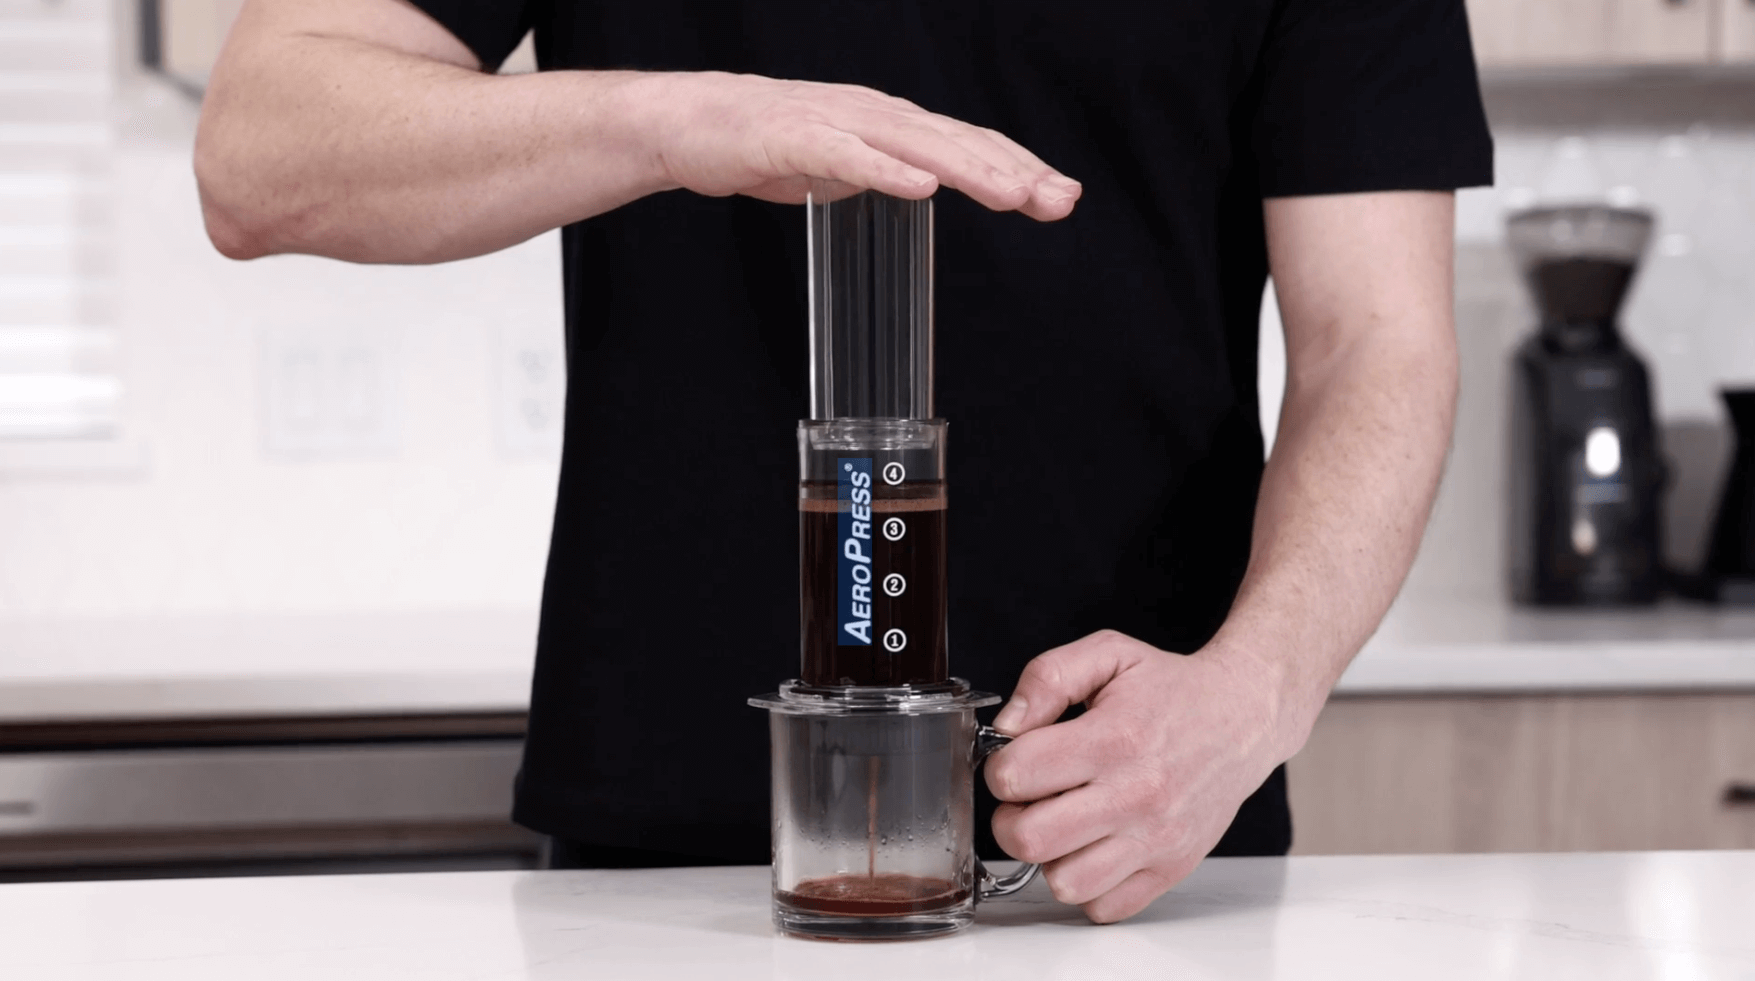 The Aeropress Flow Control Cap: The Best Way to do the Inverted Method 